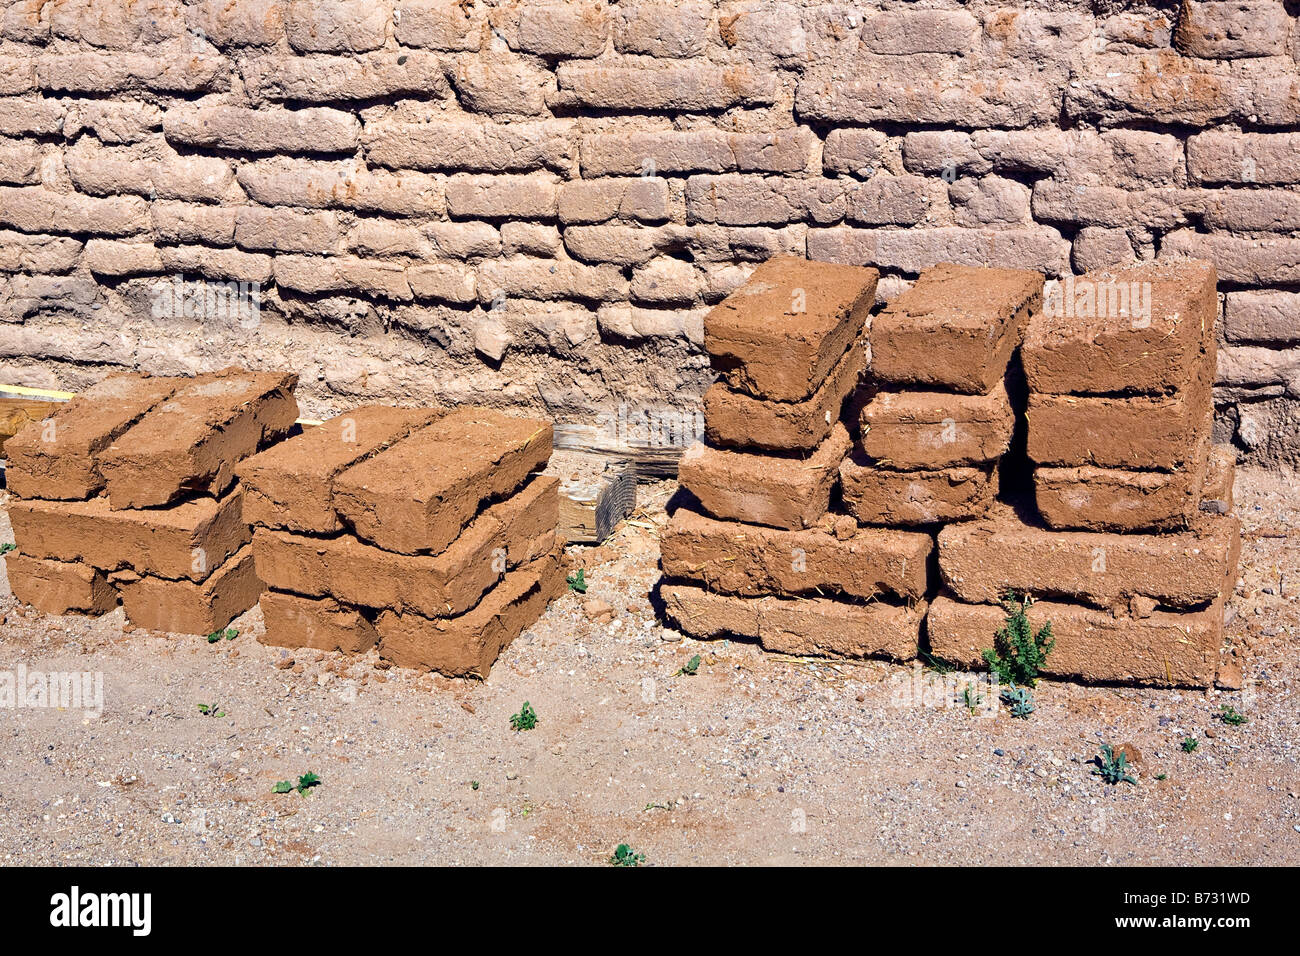 Image of traditional adobe bricks stacked and drying against an adobe brick wall in the sun Stock Photo